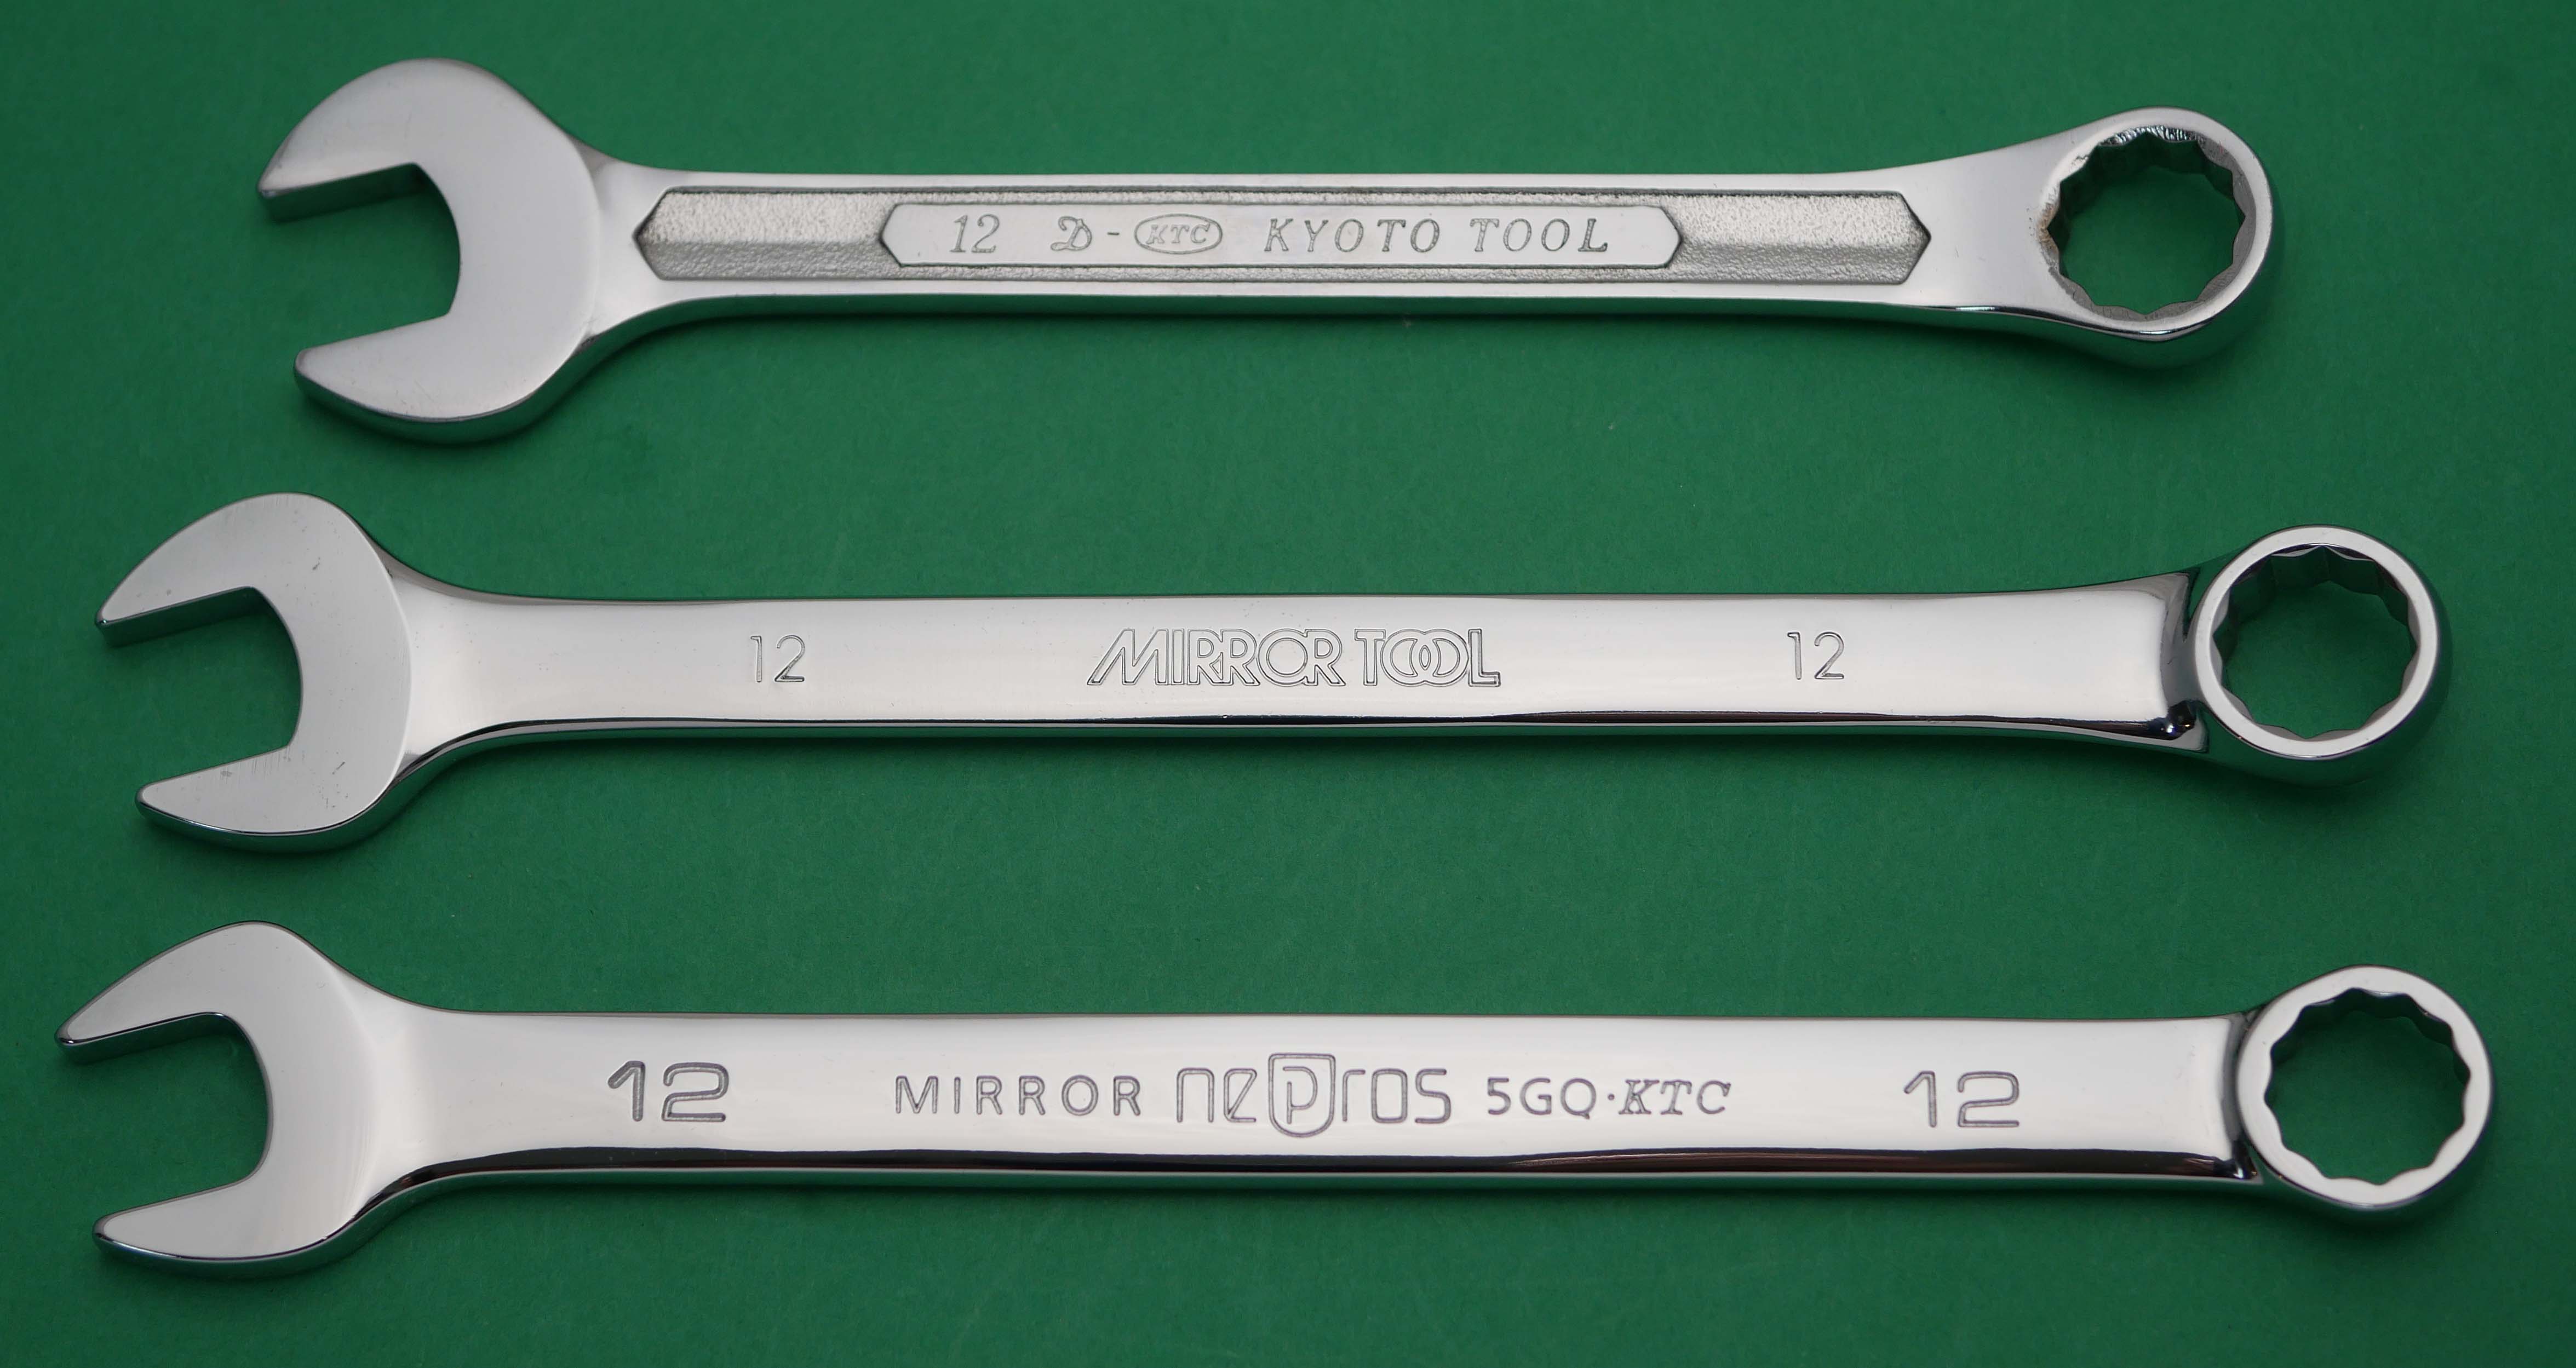 KTC Nepros NM11L-1012 Flat Type Extra Long Box End Wrench 10x12mm Japan Tracking 